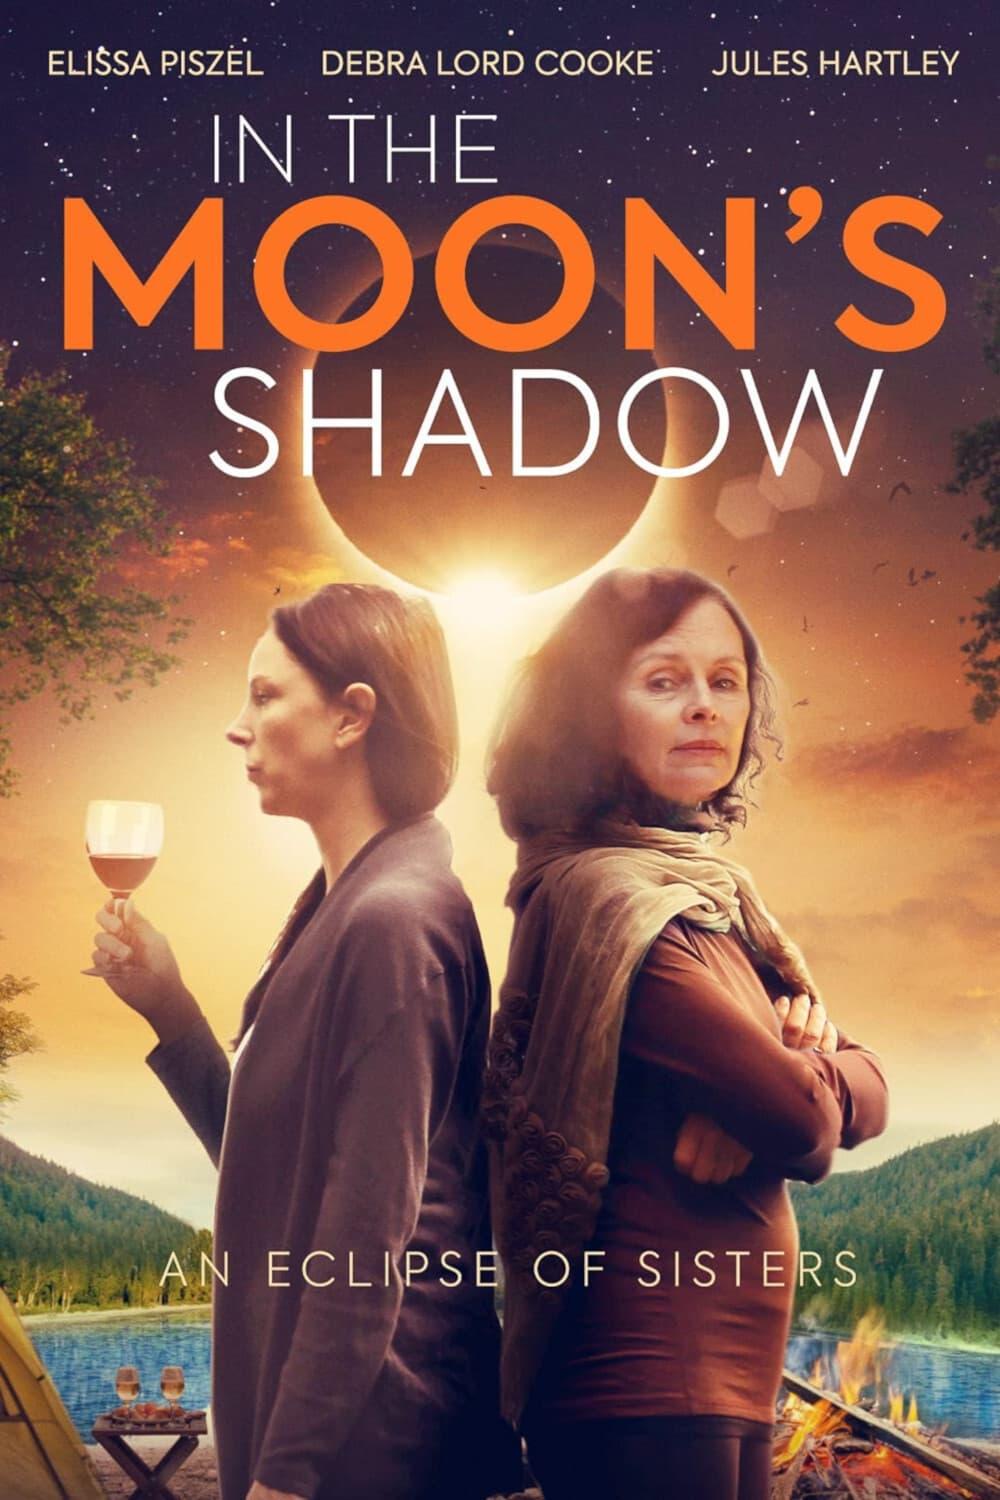 In the Moon's Shadow poster